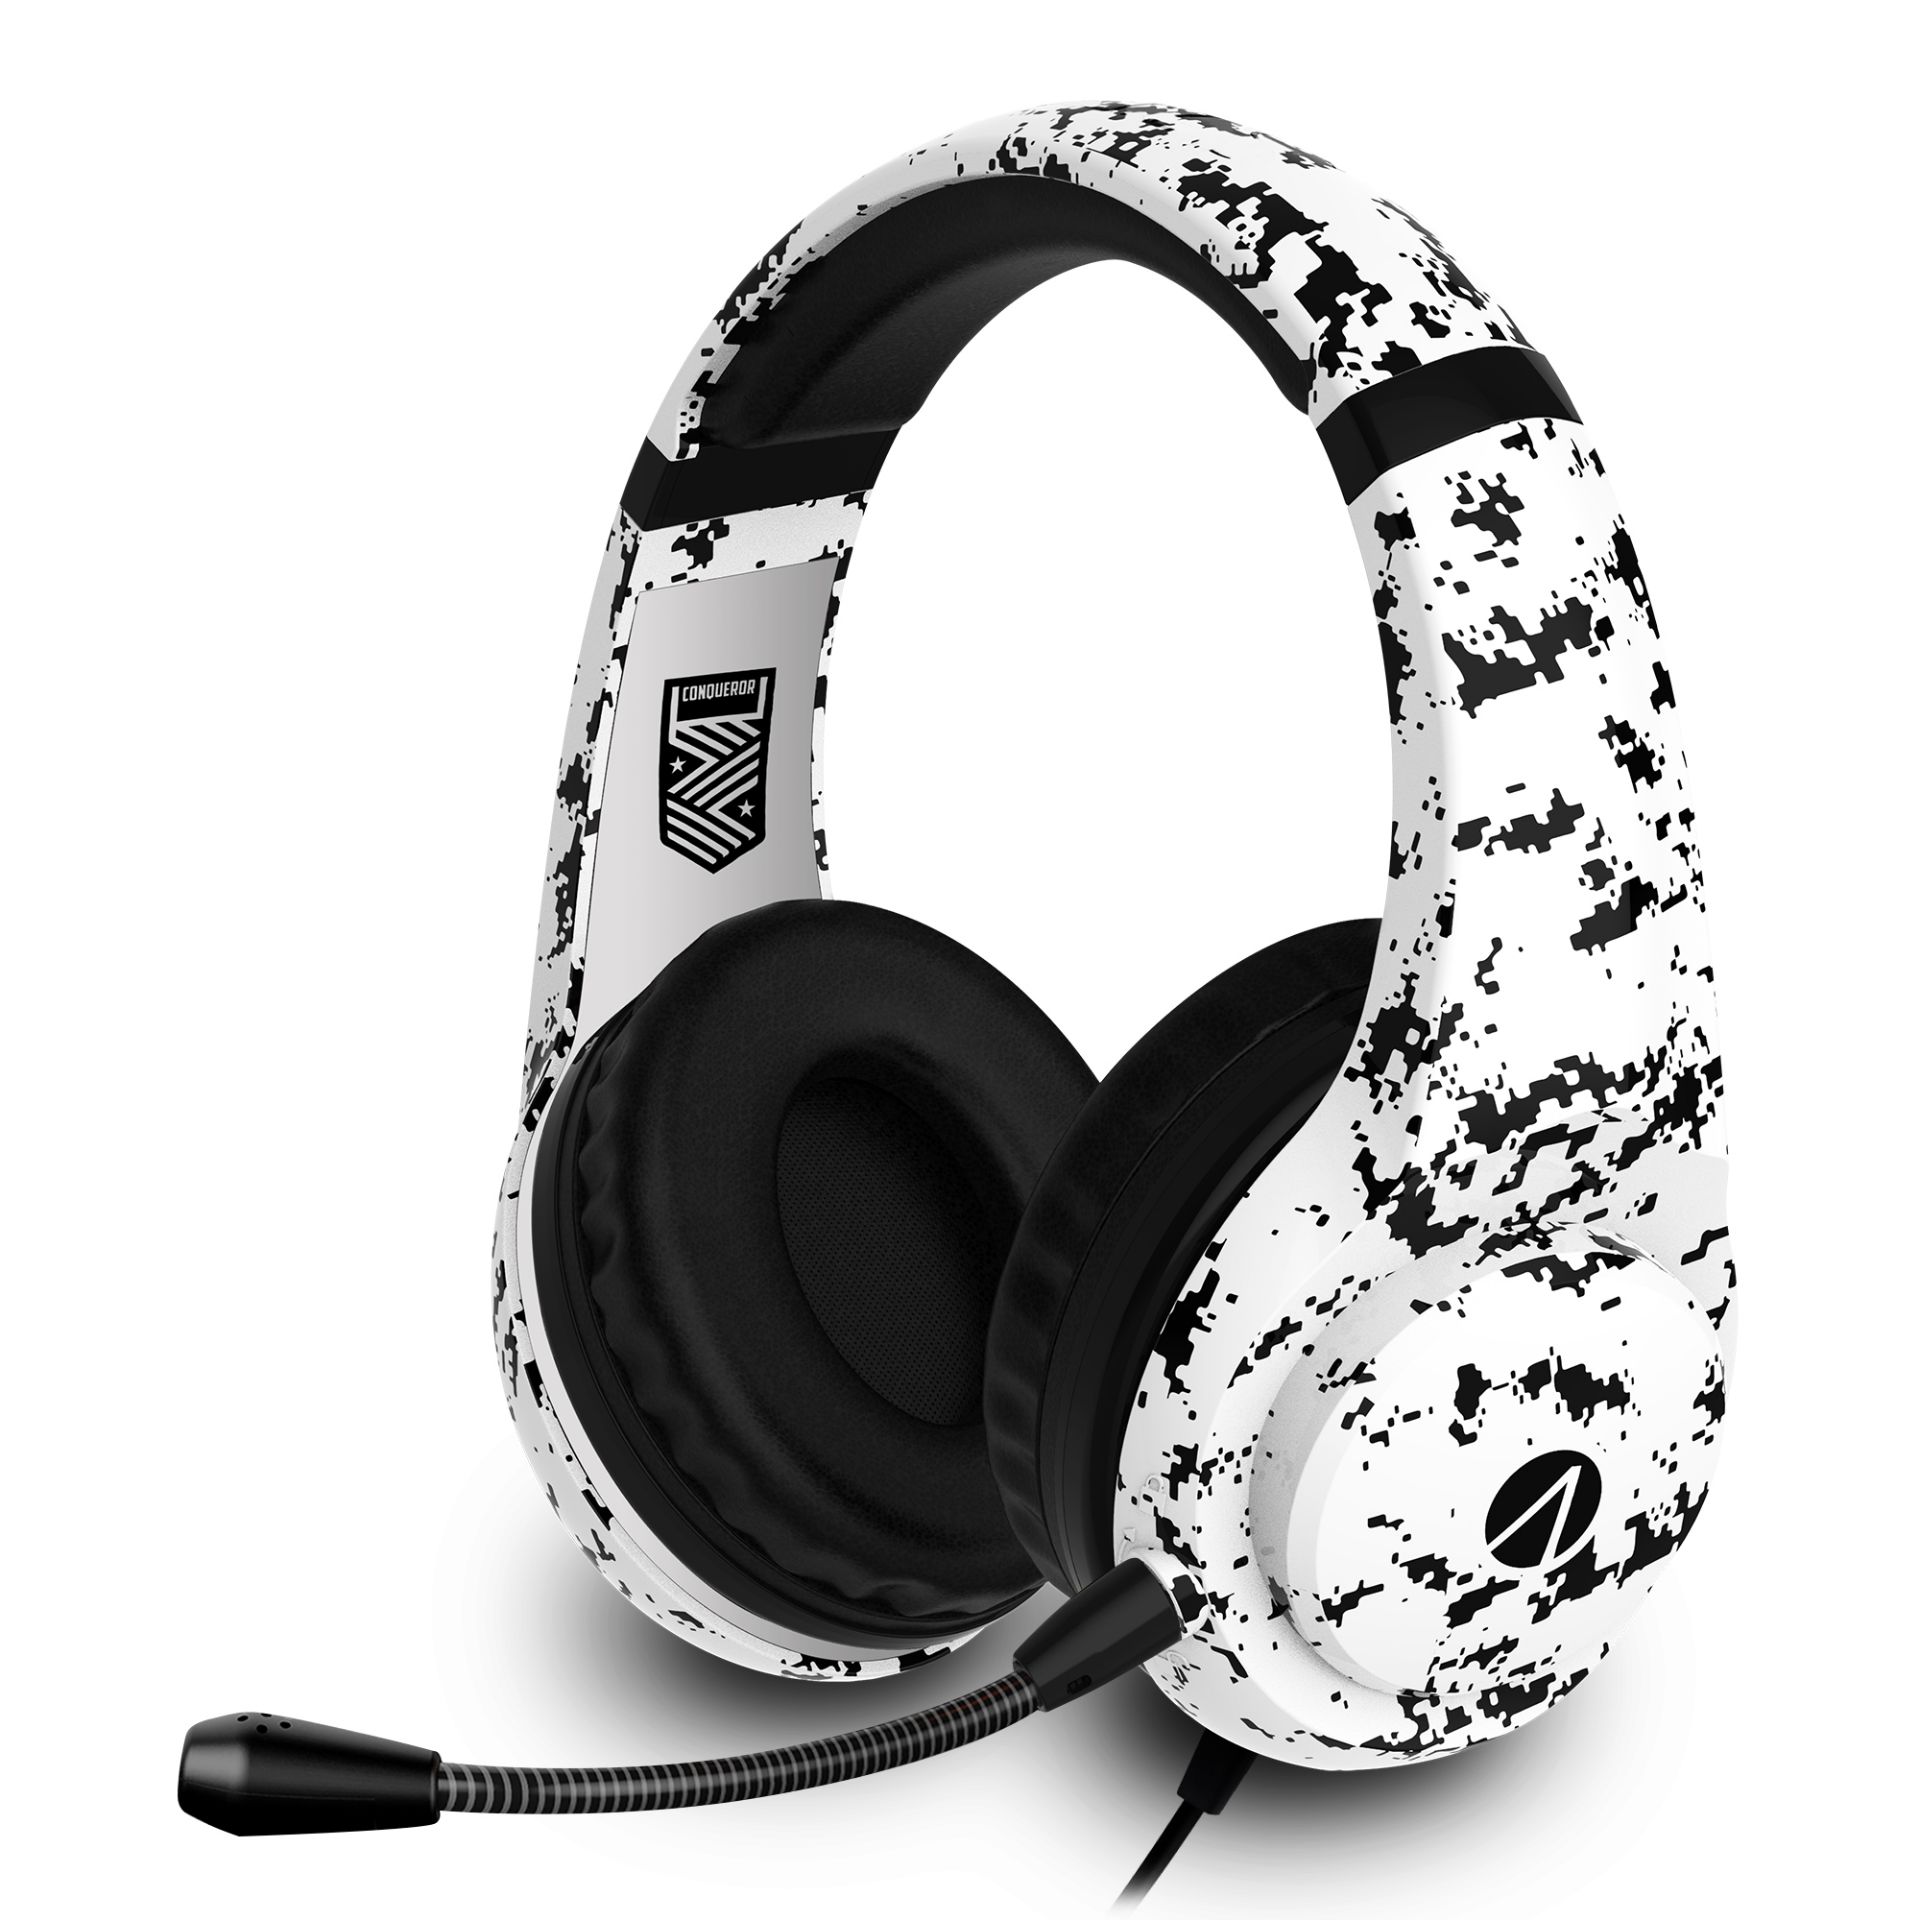 (R14C) 5x Items. 2x Stealth Gaming Headset Camouflage. 3x Venom Nighthawk Stereo Gaming Headset.